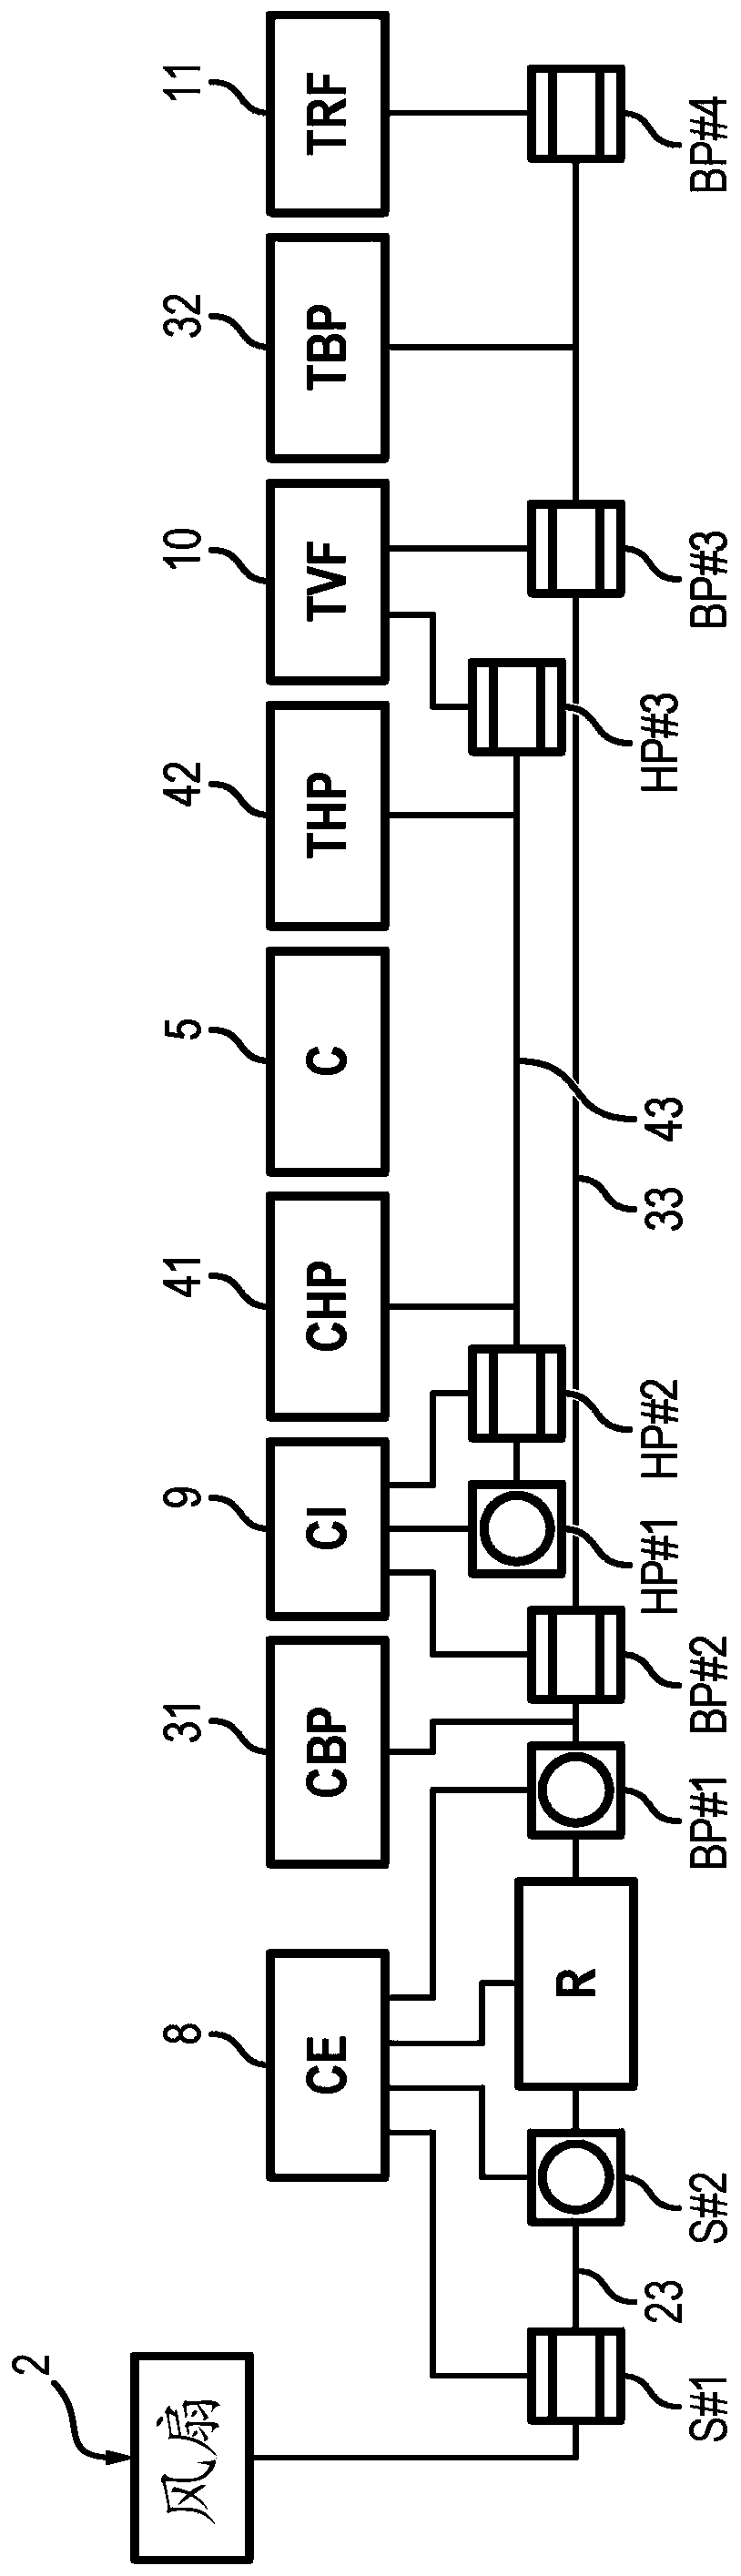 Twin-spool turbojet engine having low-pressure shaft thrust bearing positioned in exhaust casing